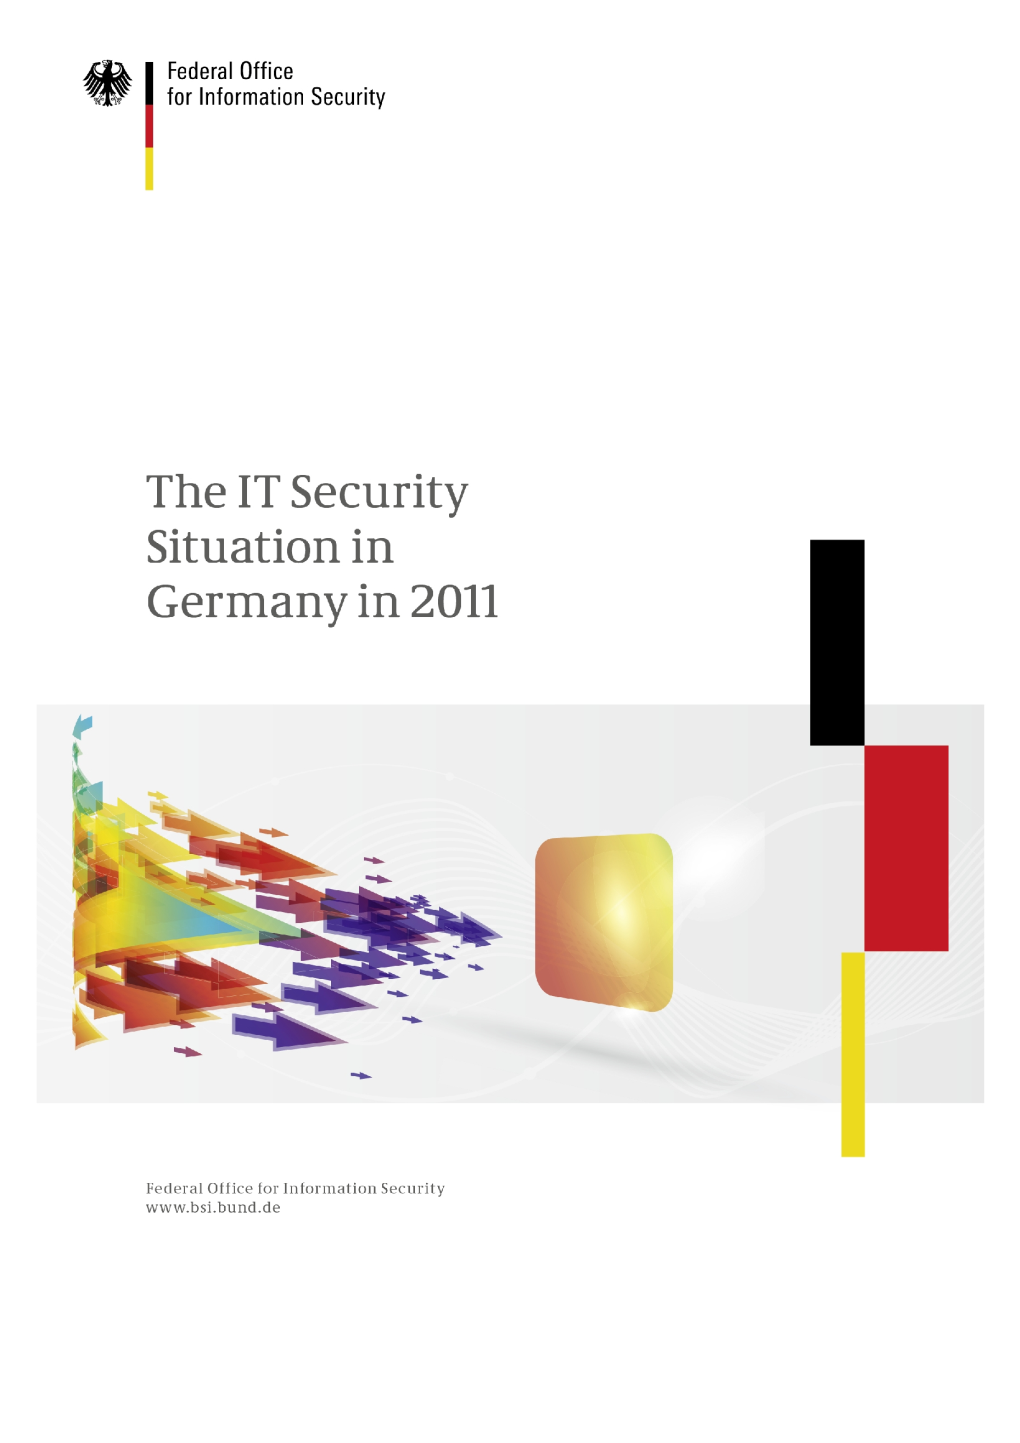 The IT Security Situation in Germany in 2011